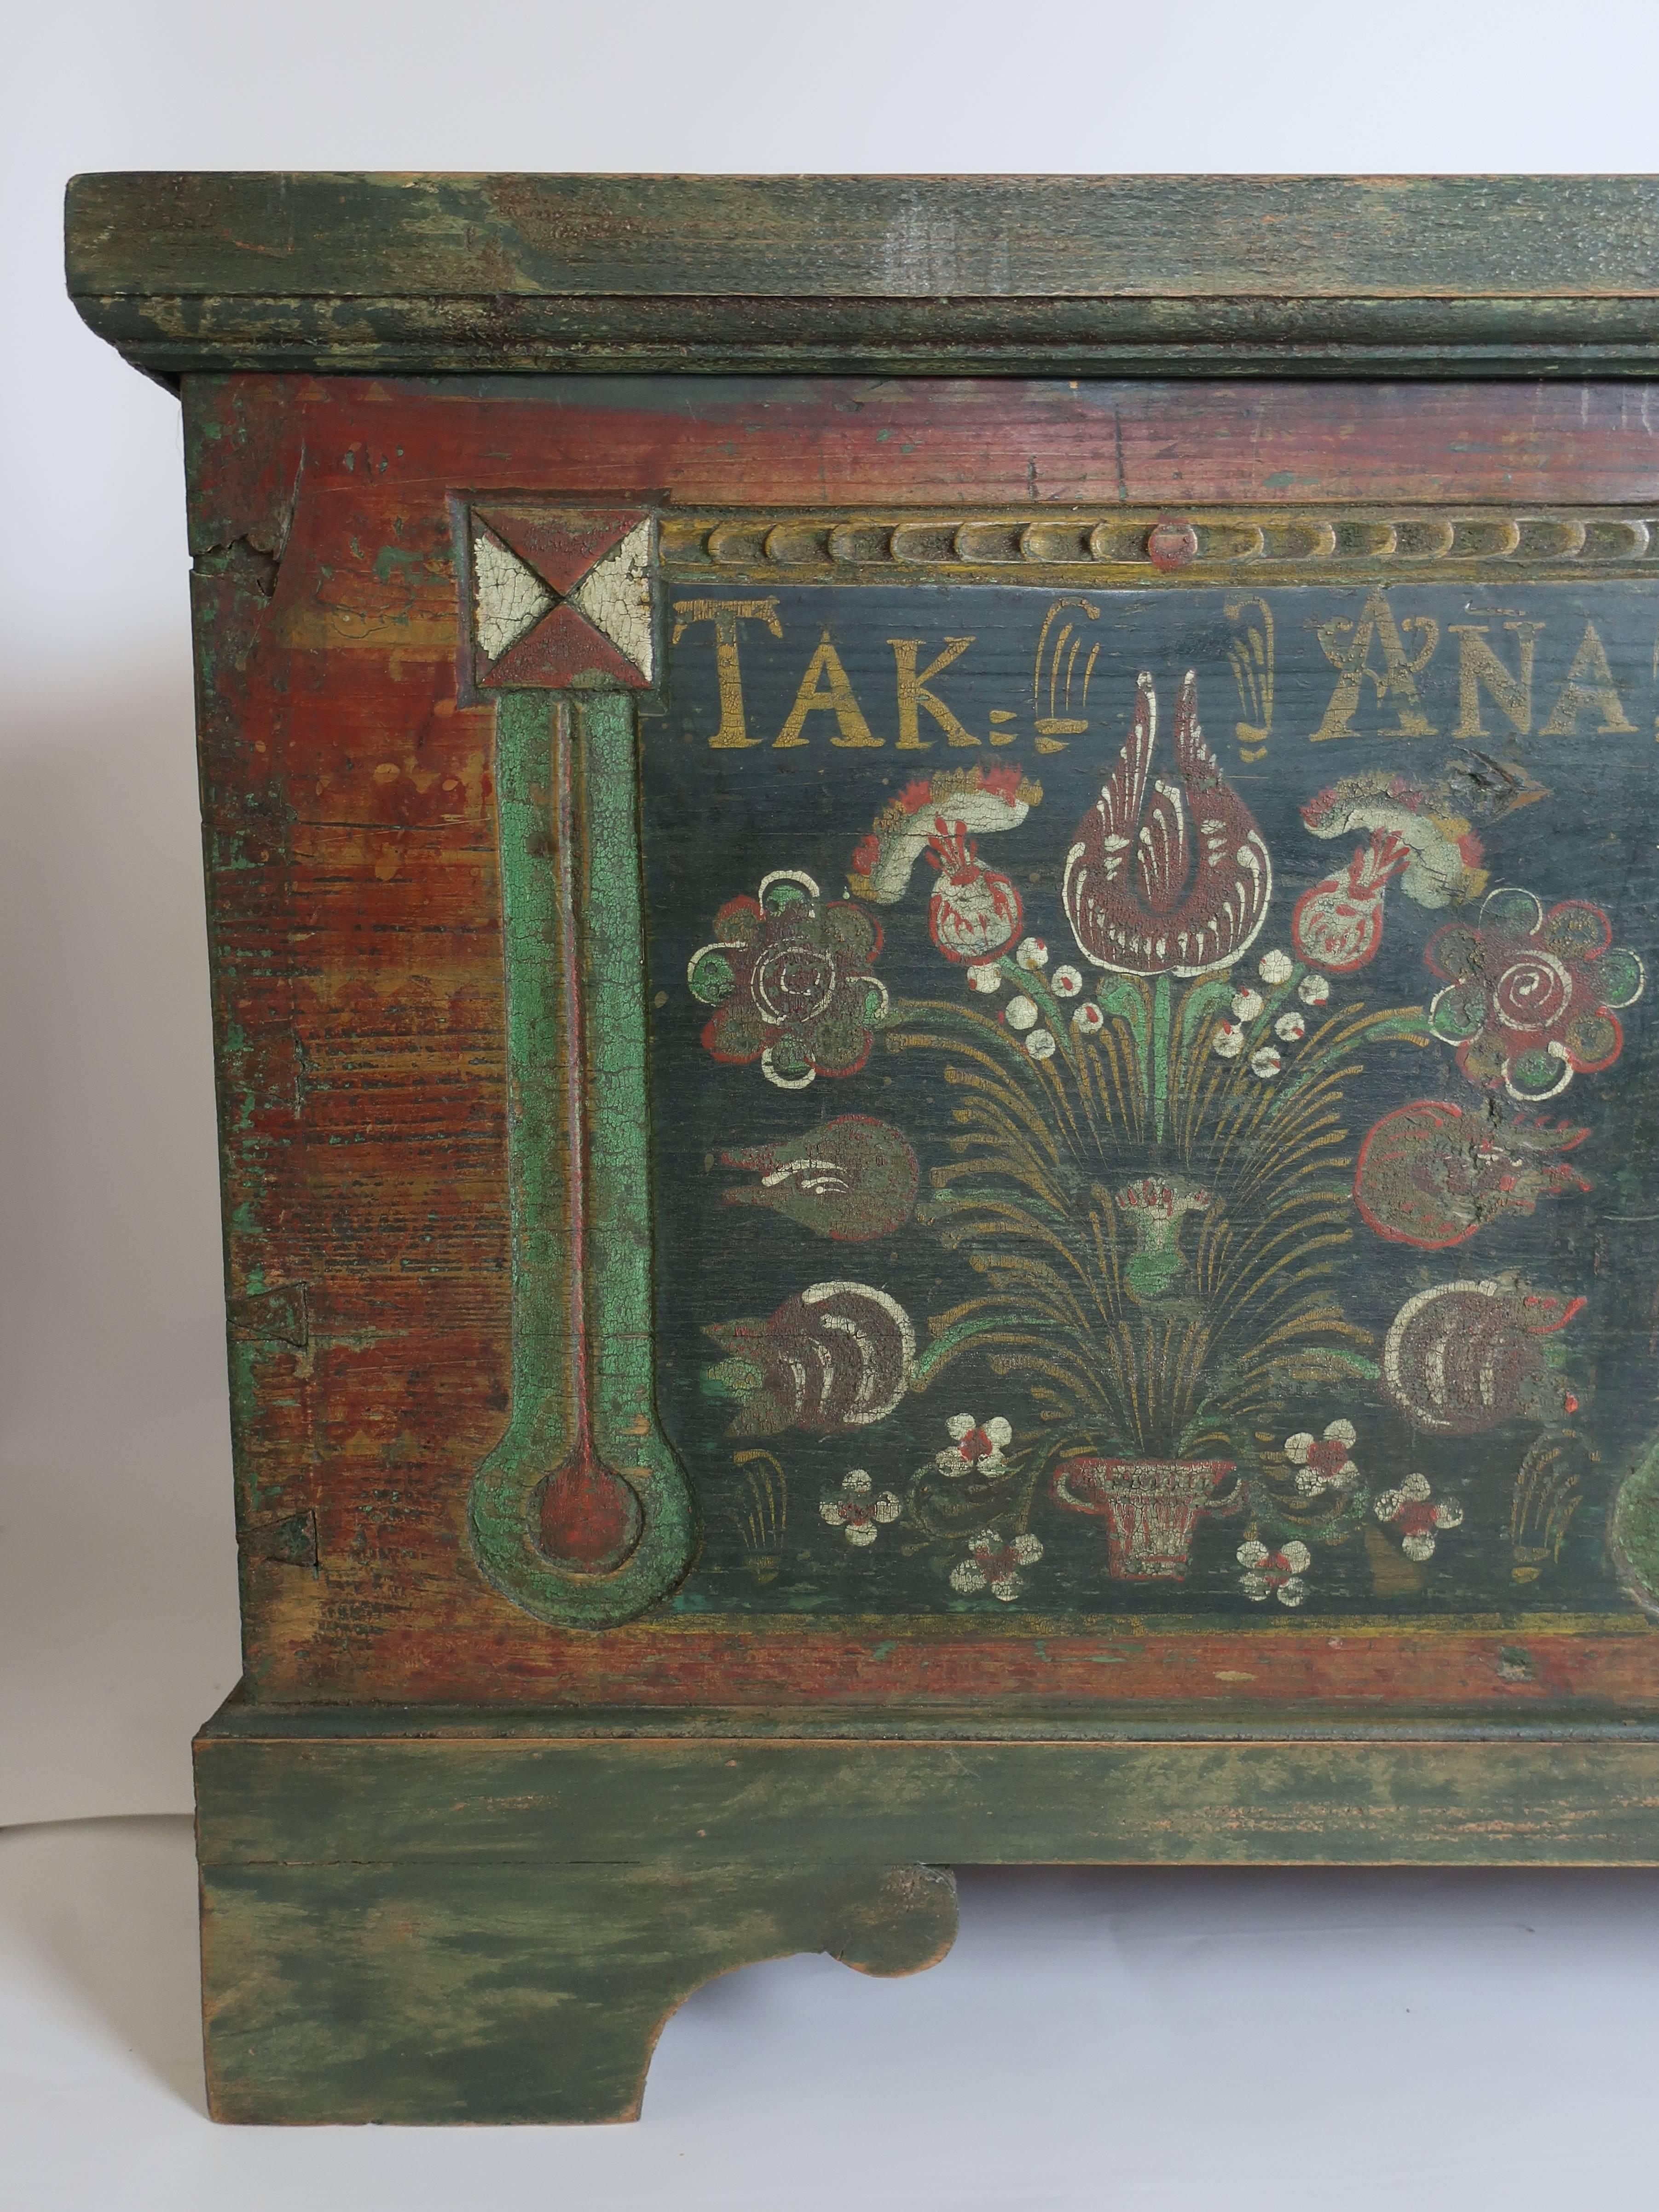 Polychrome blanket chest inscribed, Kat and Ana, Anno, 1848. Green and red base with polychrome figures of tulips, white flowers and simple columns defining the tombstone panels. There is some decorative carved detail on the front. The chest has